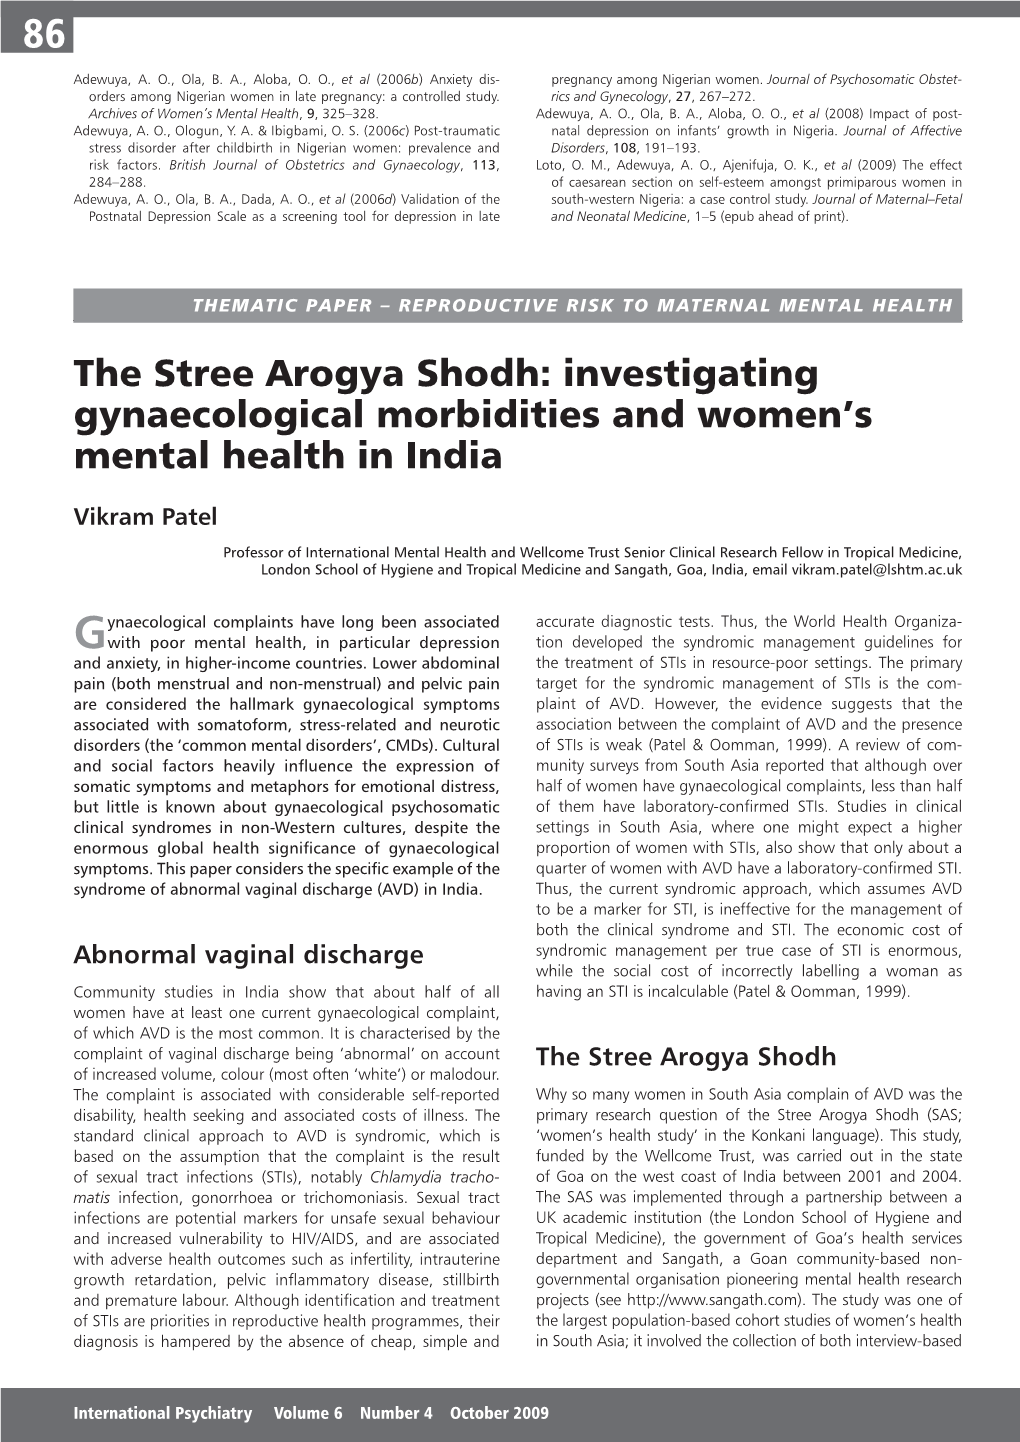 Investigating Gynaecological Morbidities and Women's Mental Health in India